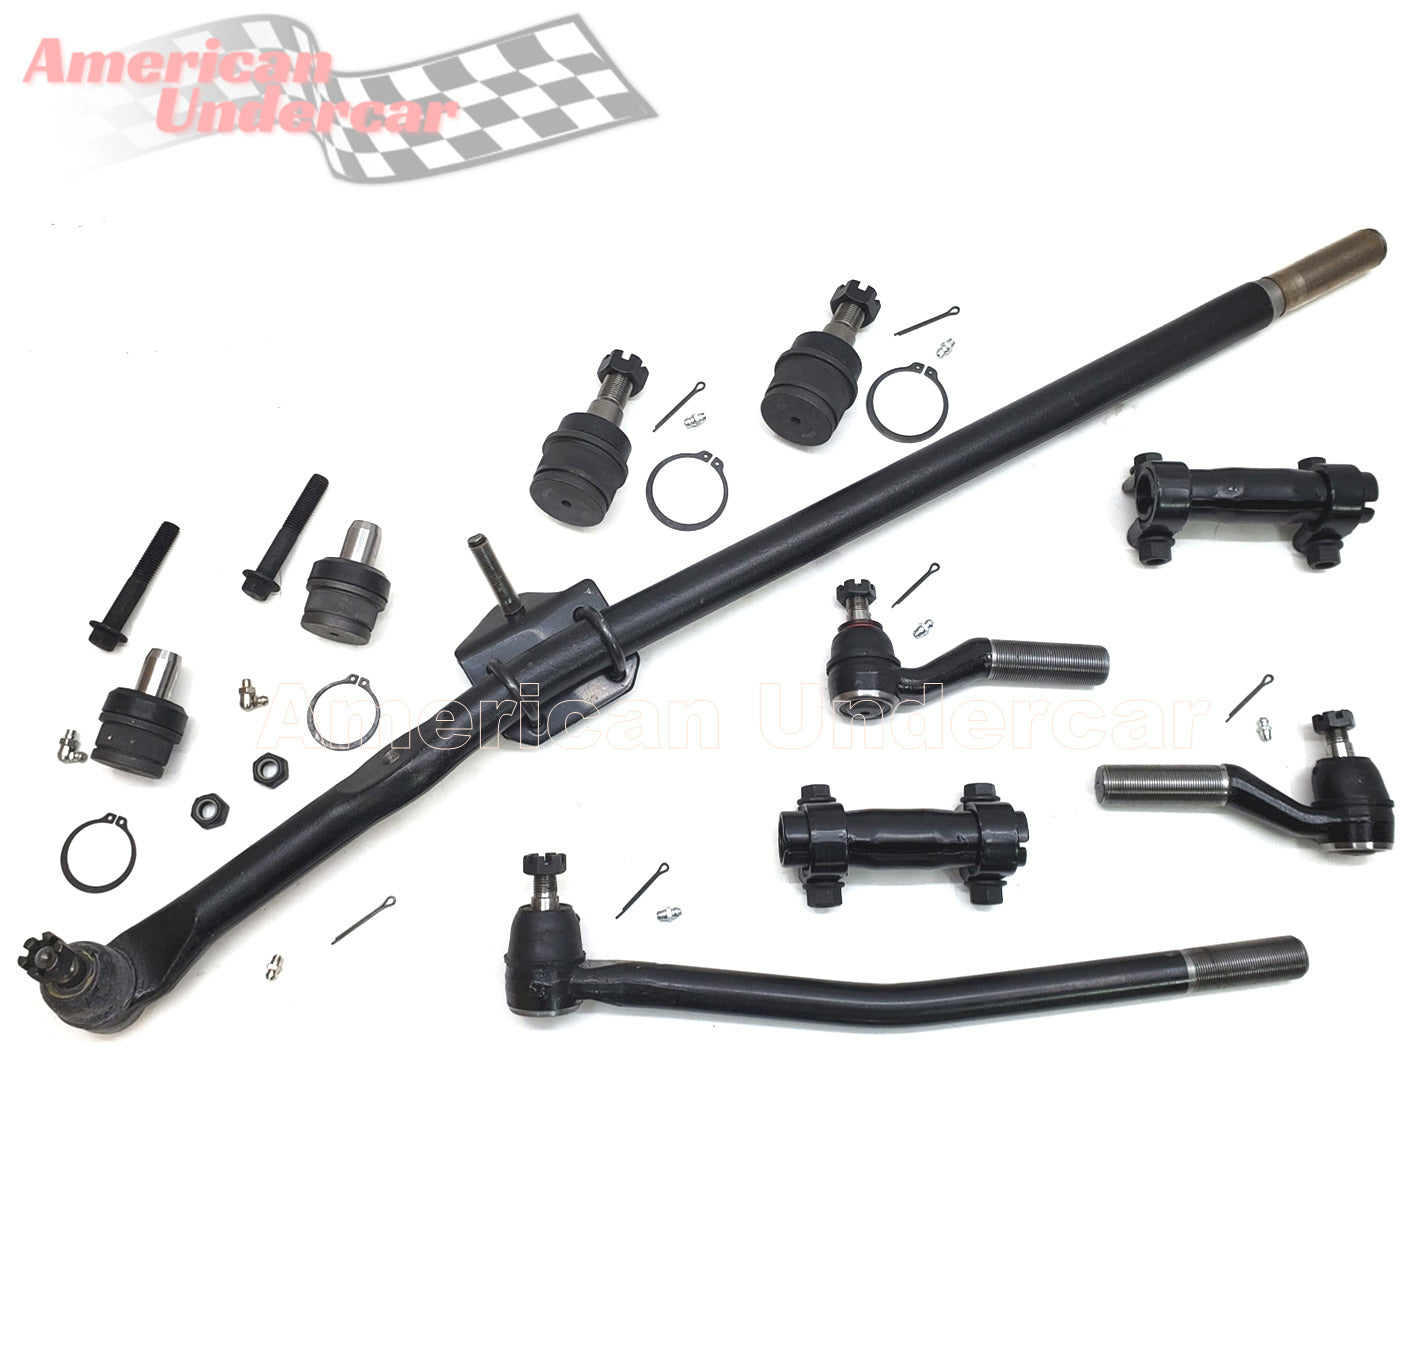 HD Ball Joints Drag Link Tie Rod Steering Kit for 1999-2006 Ford E350 DRW